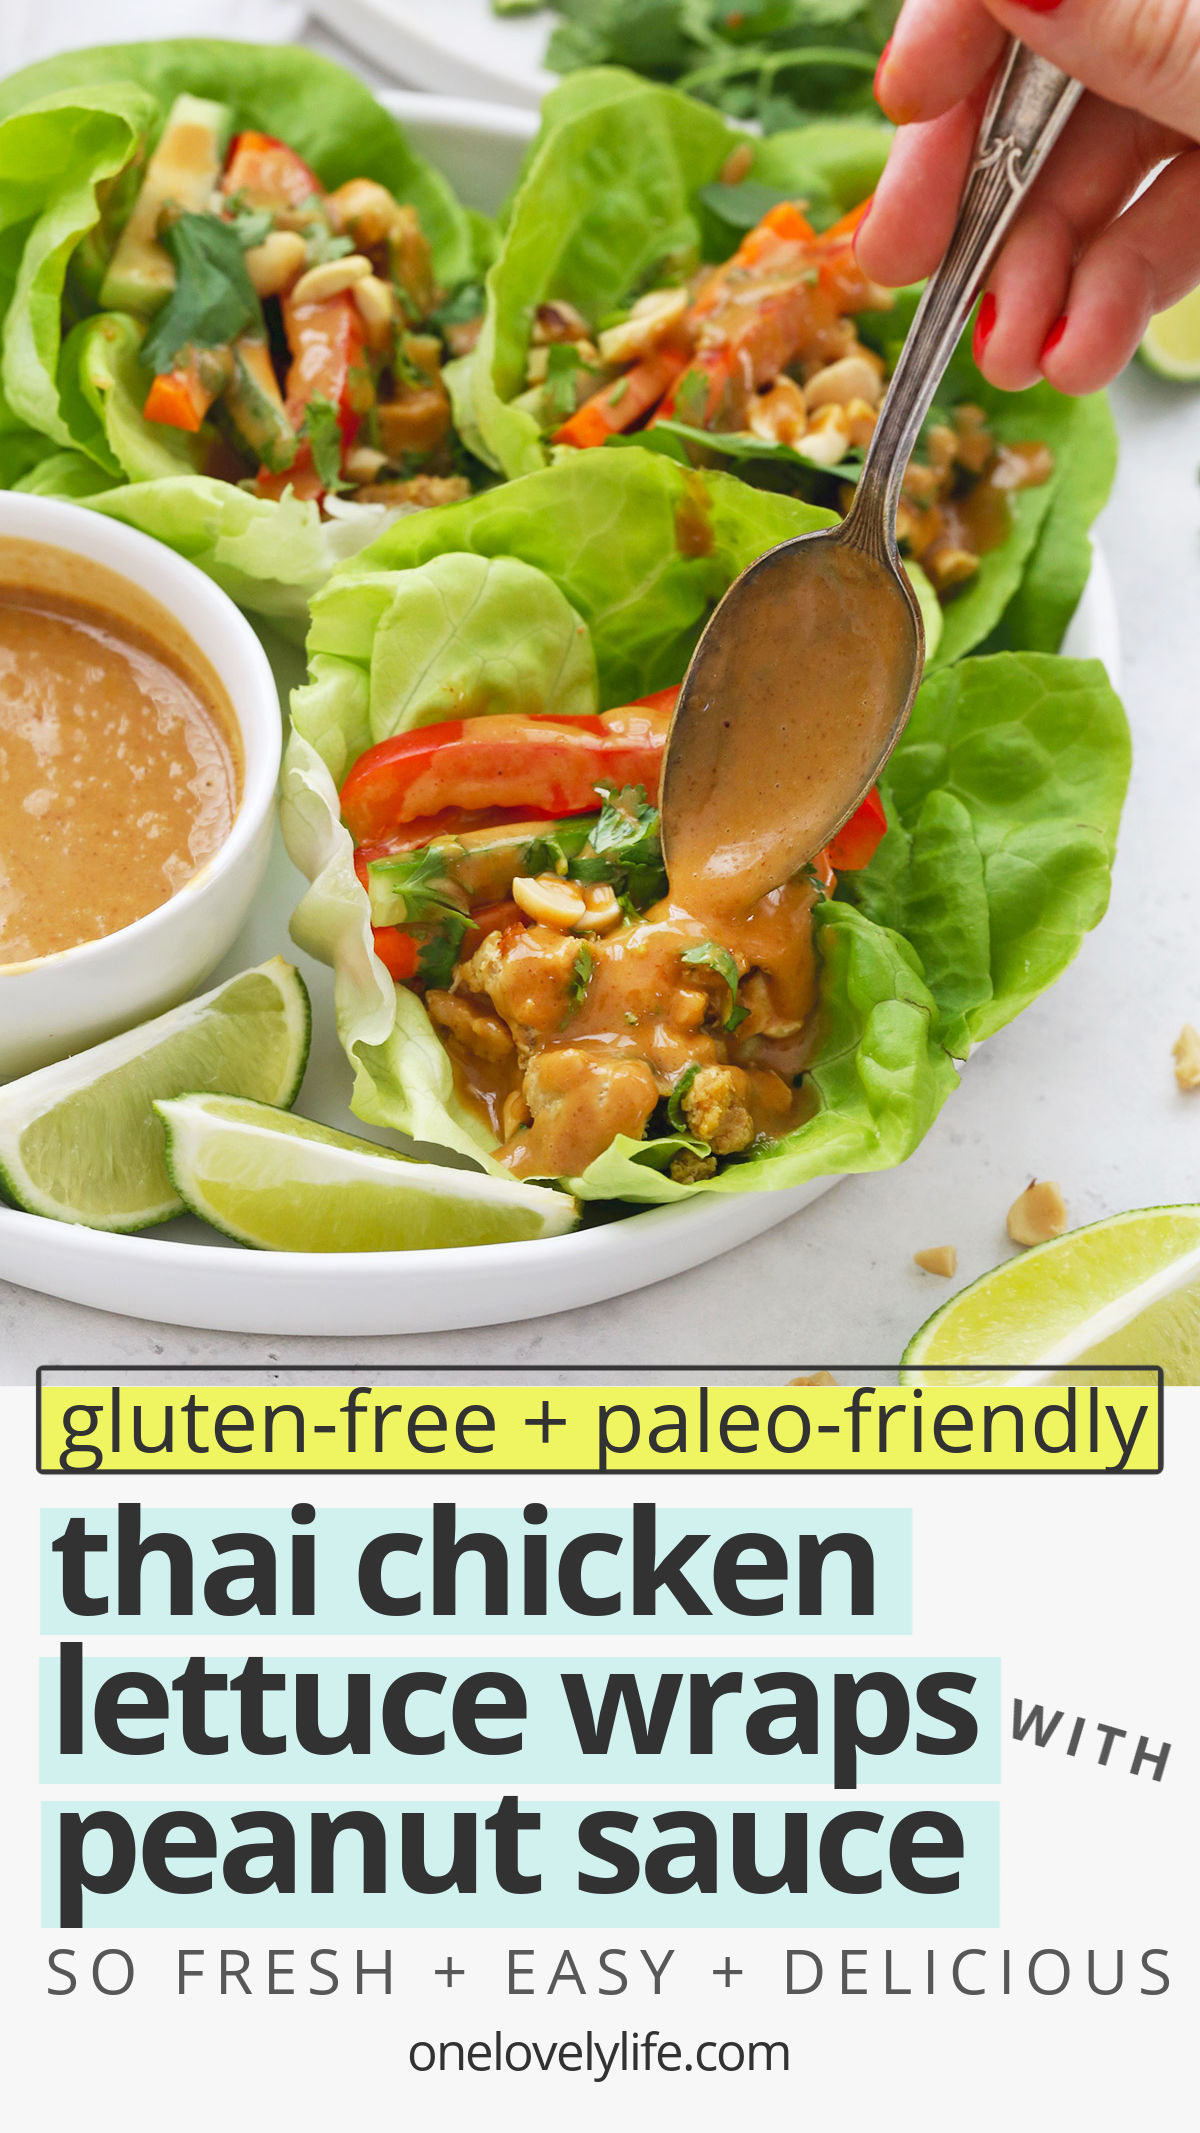 Thai Chicken Lettuce Wraps with Peanut Sauce - These Peanut Chicken Lettuce Wraps use flavorful chicken, crisp, fresh veggies, and THE BEST peanut sauce to make a delicious, easy dinner. // Peanut Lettuce Wraps // Easy dinner // Healthy Dinner #peanutsauce #lettucewraps #chicken #healthydinner #easydinner